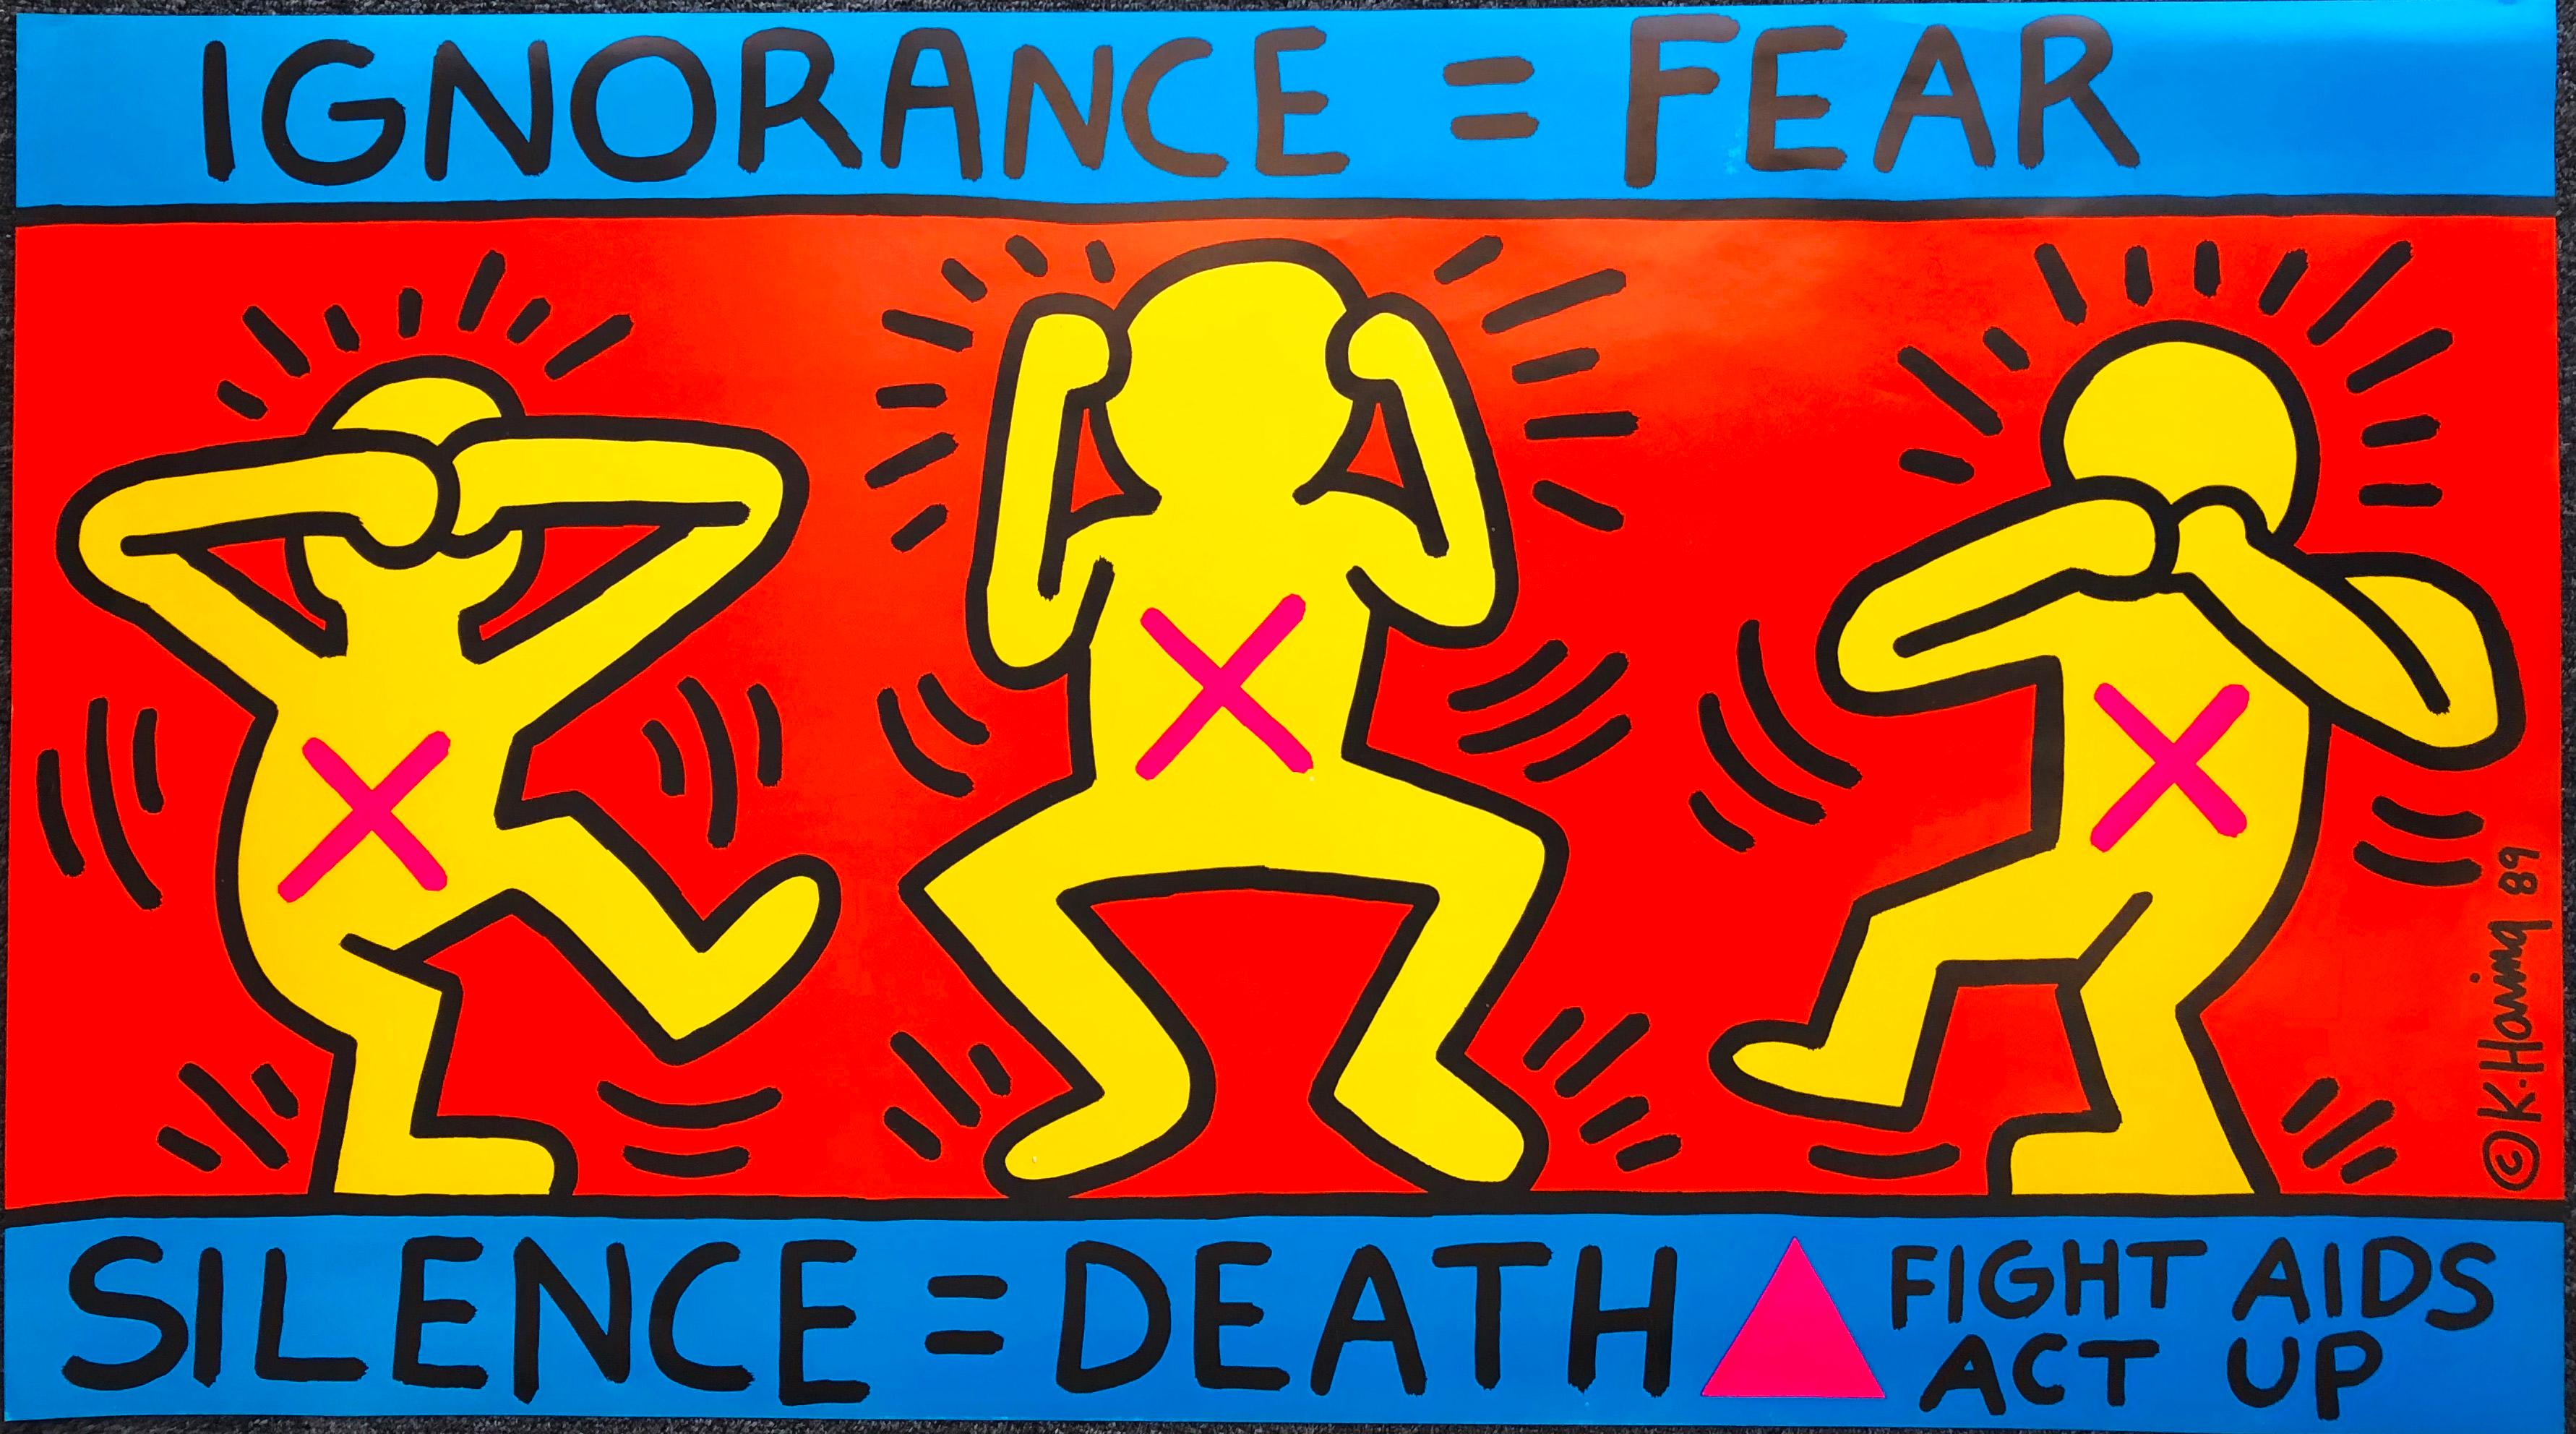 keith haring ignorance fear 1989